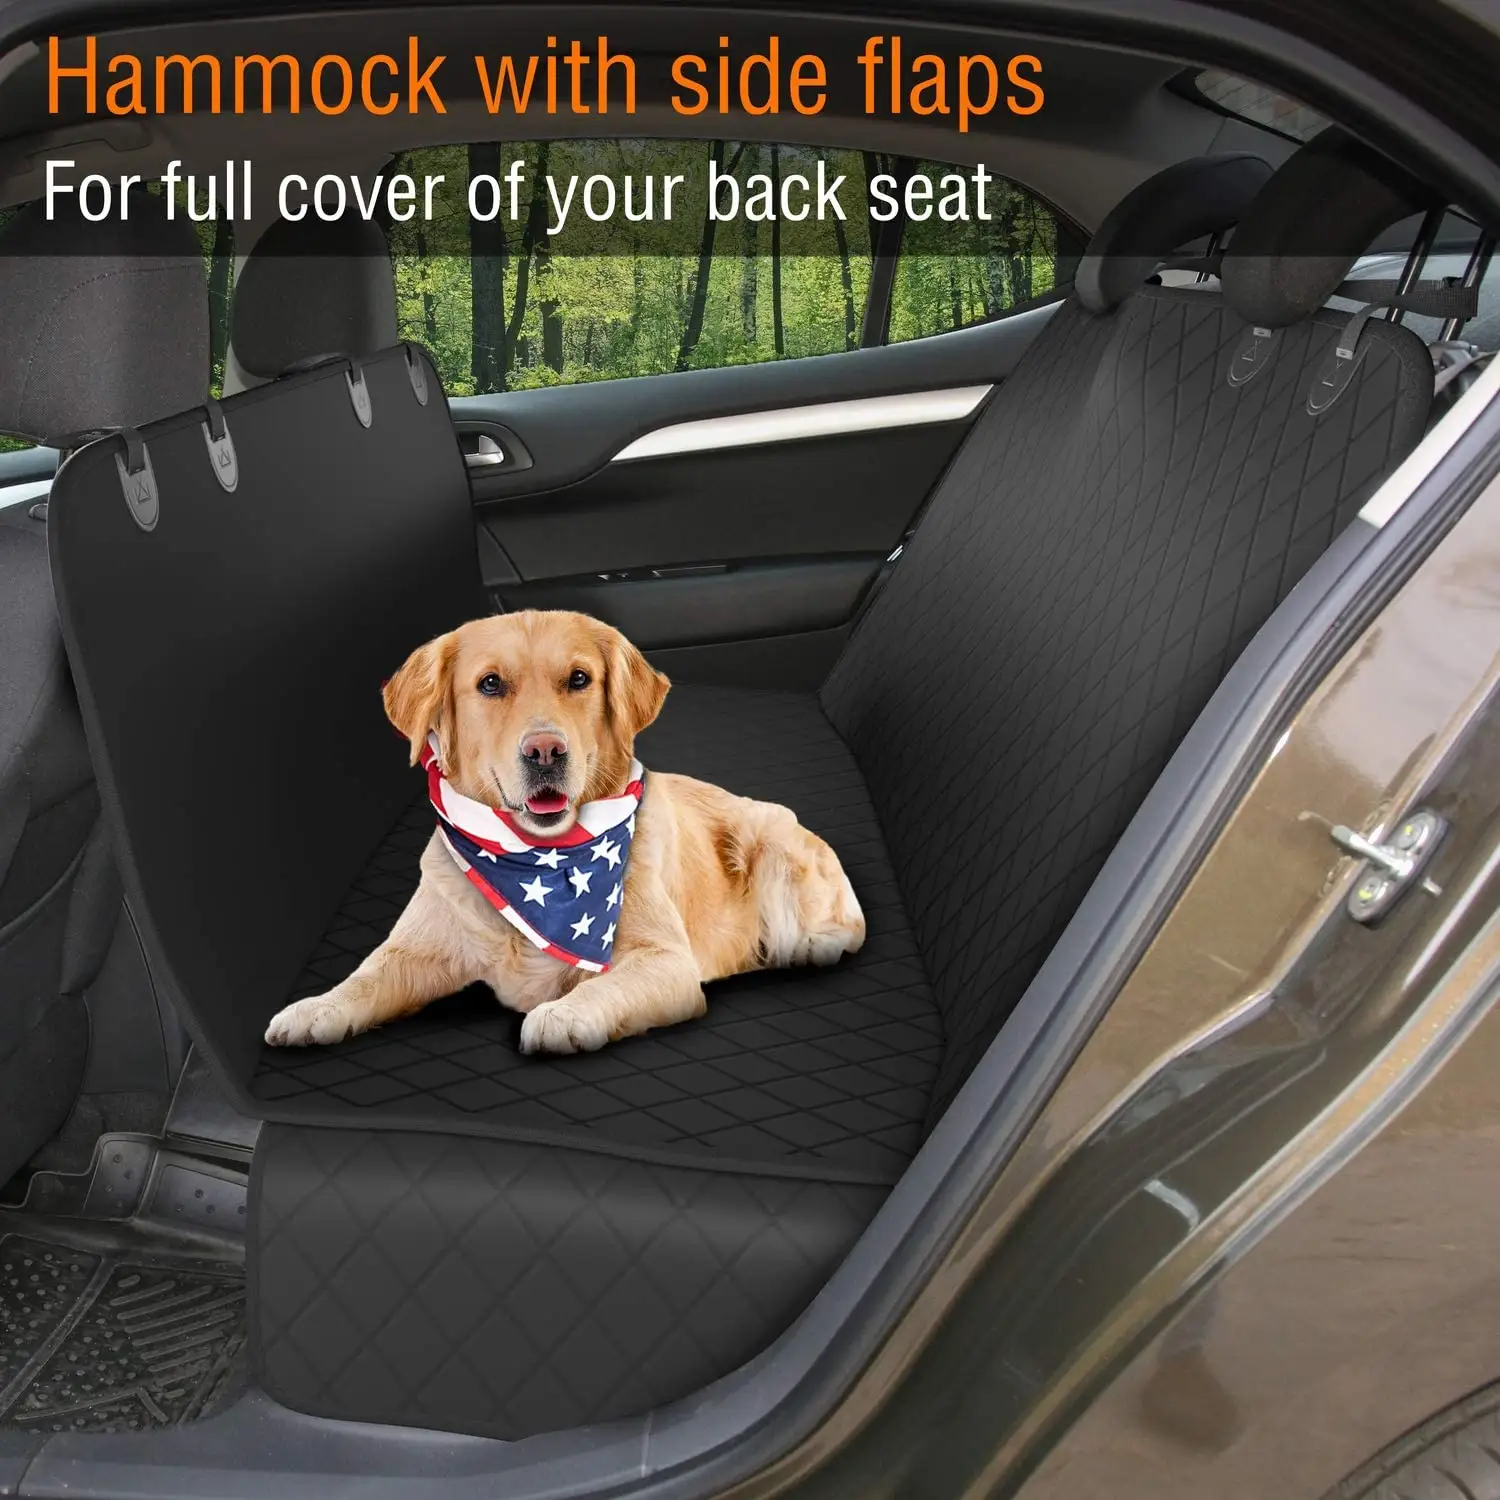 100% Waterproof Black Universal XL dog seat cover car pet car cover for back seat for dogs and cats